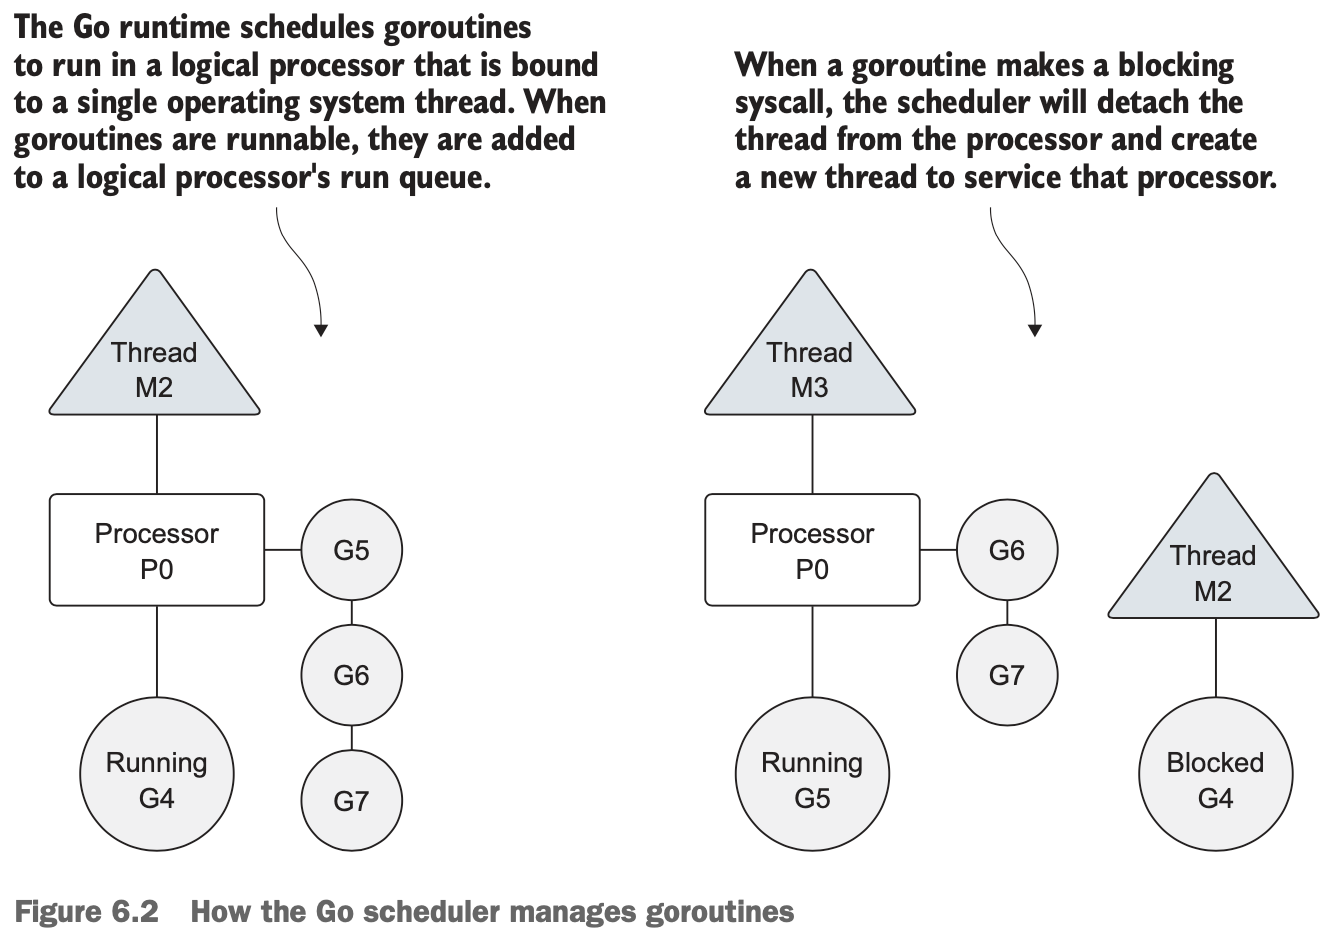 Figure 6.2 How the Go scheduler manages goroutines